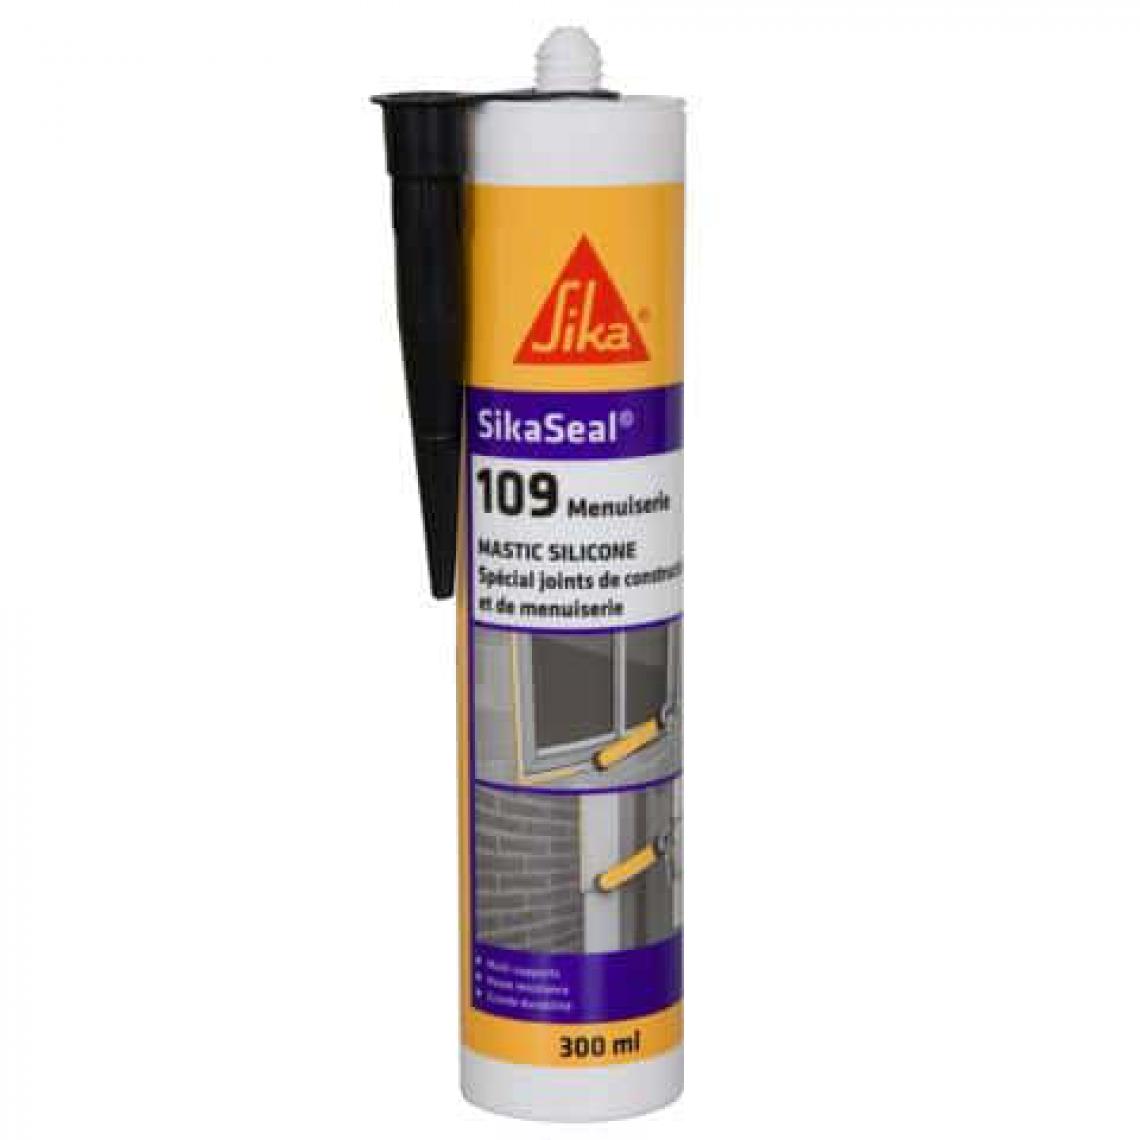 Sika - Mastic silicone spécial joint de menuiserie - SIKA SikaSeal 109 Menuiserie - Noir - 300ml - Colle & adhésif